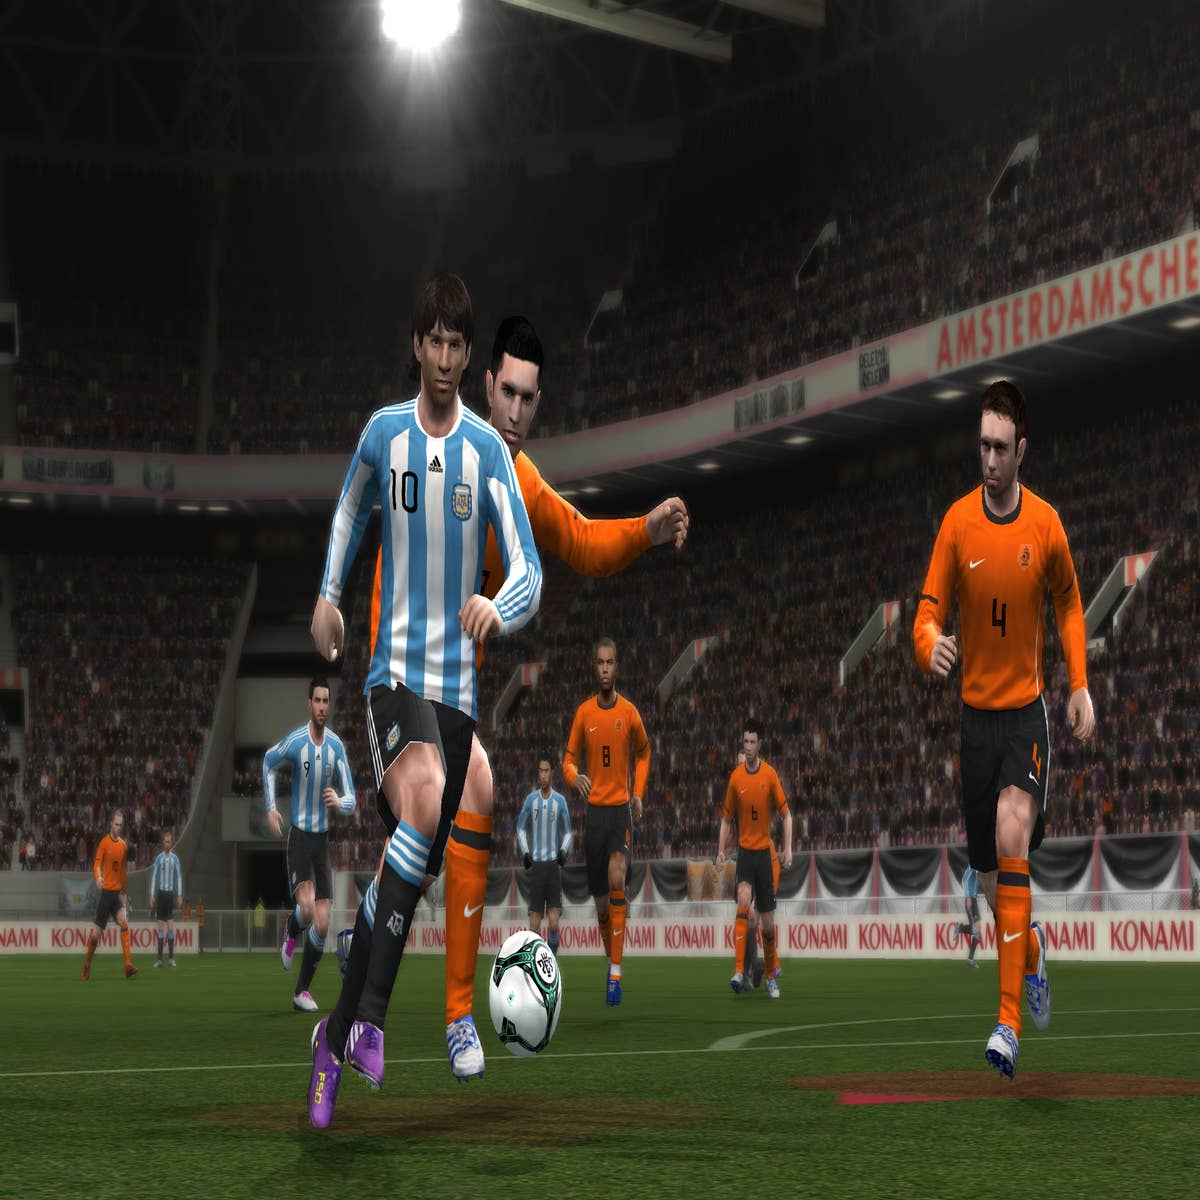 Pro Evolution Soccer 2011 review - All About Symbian